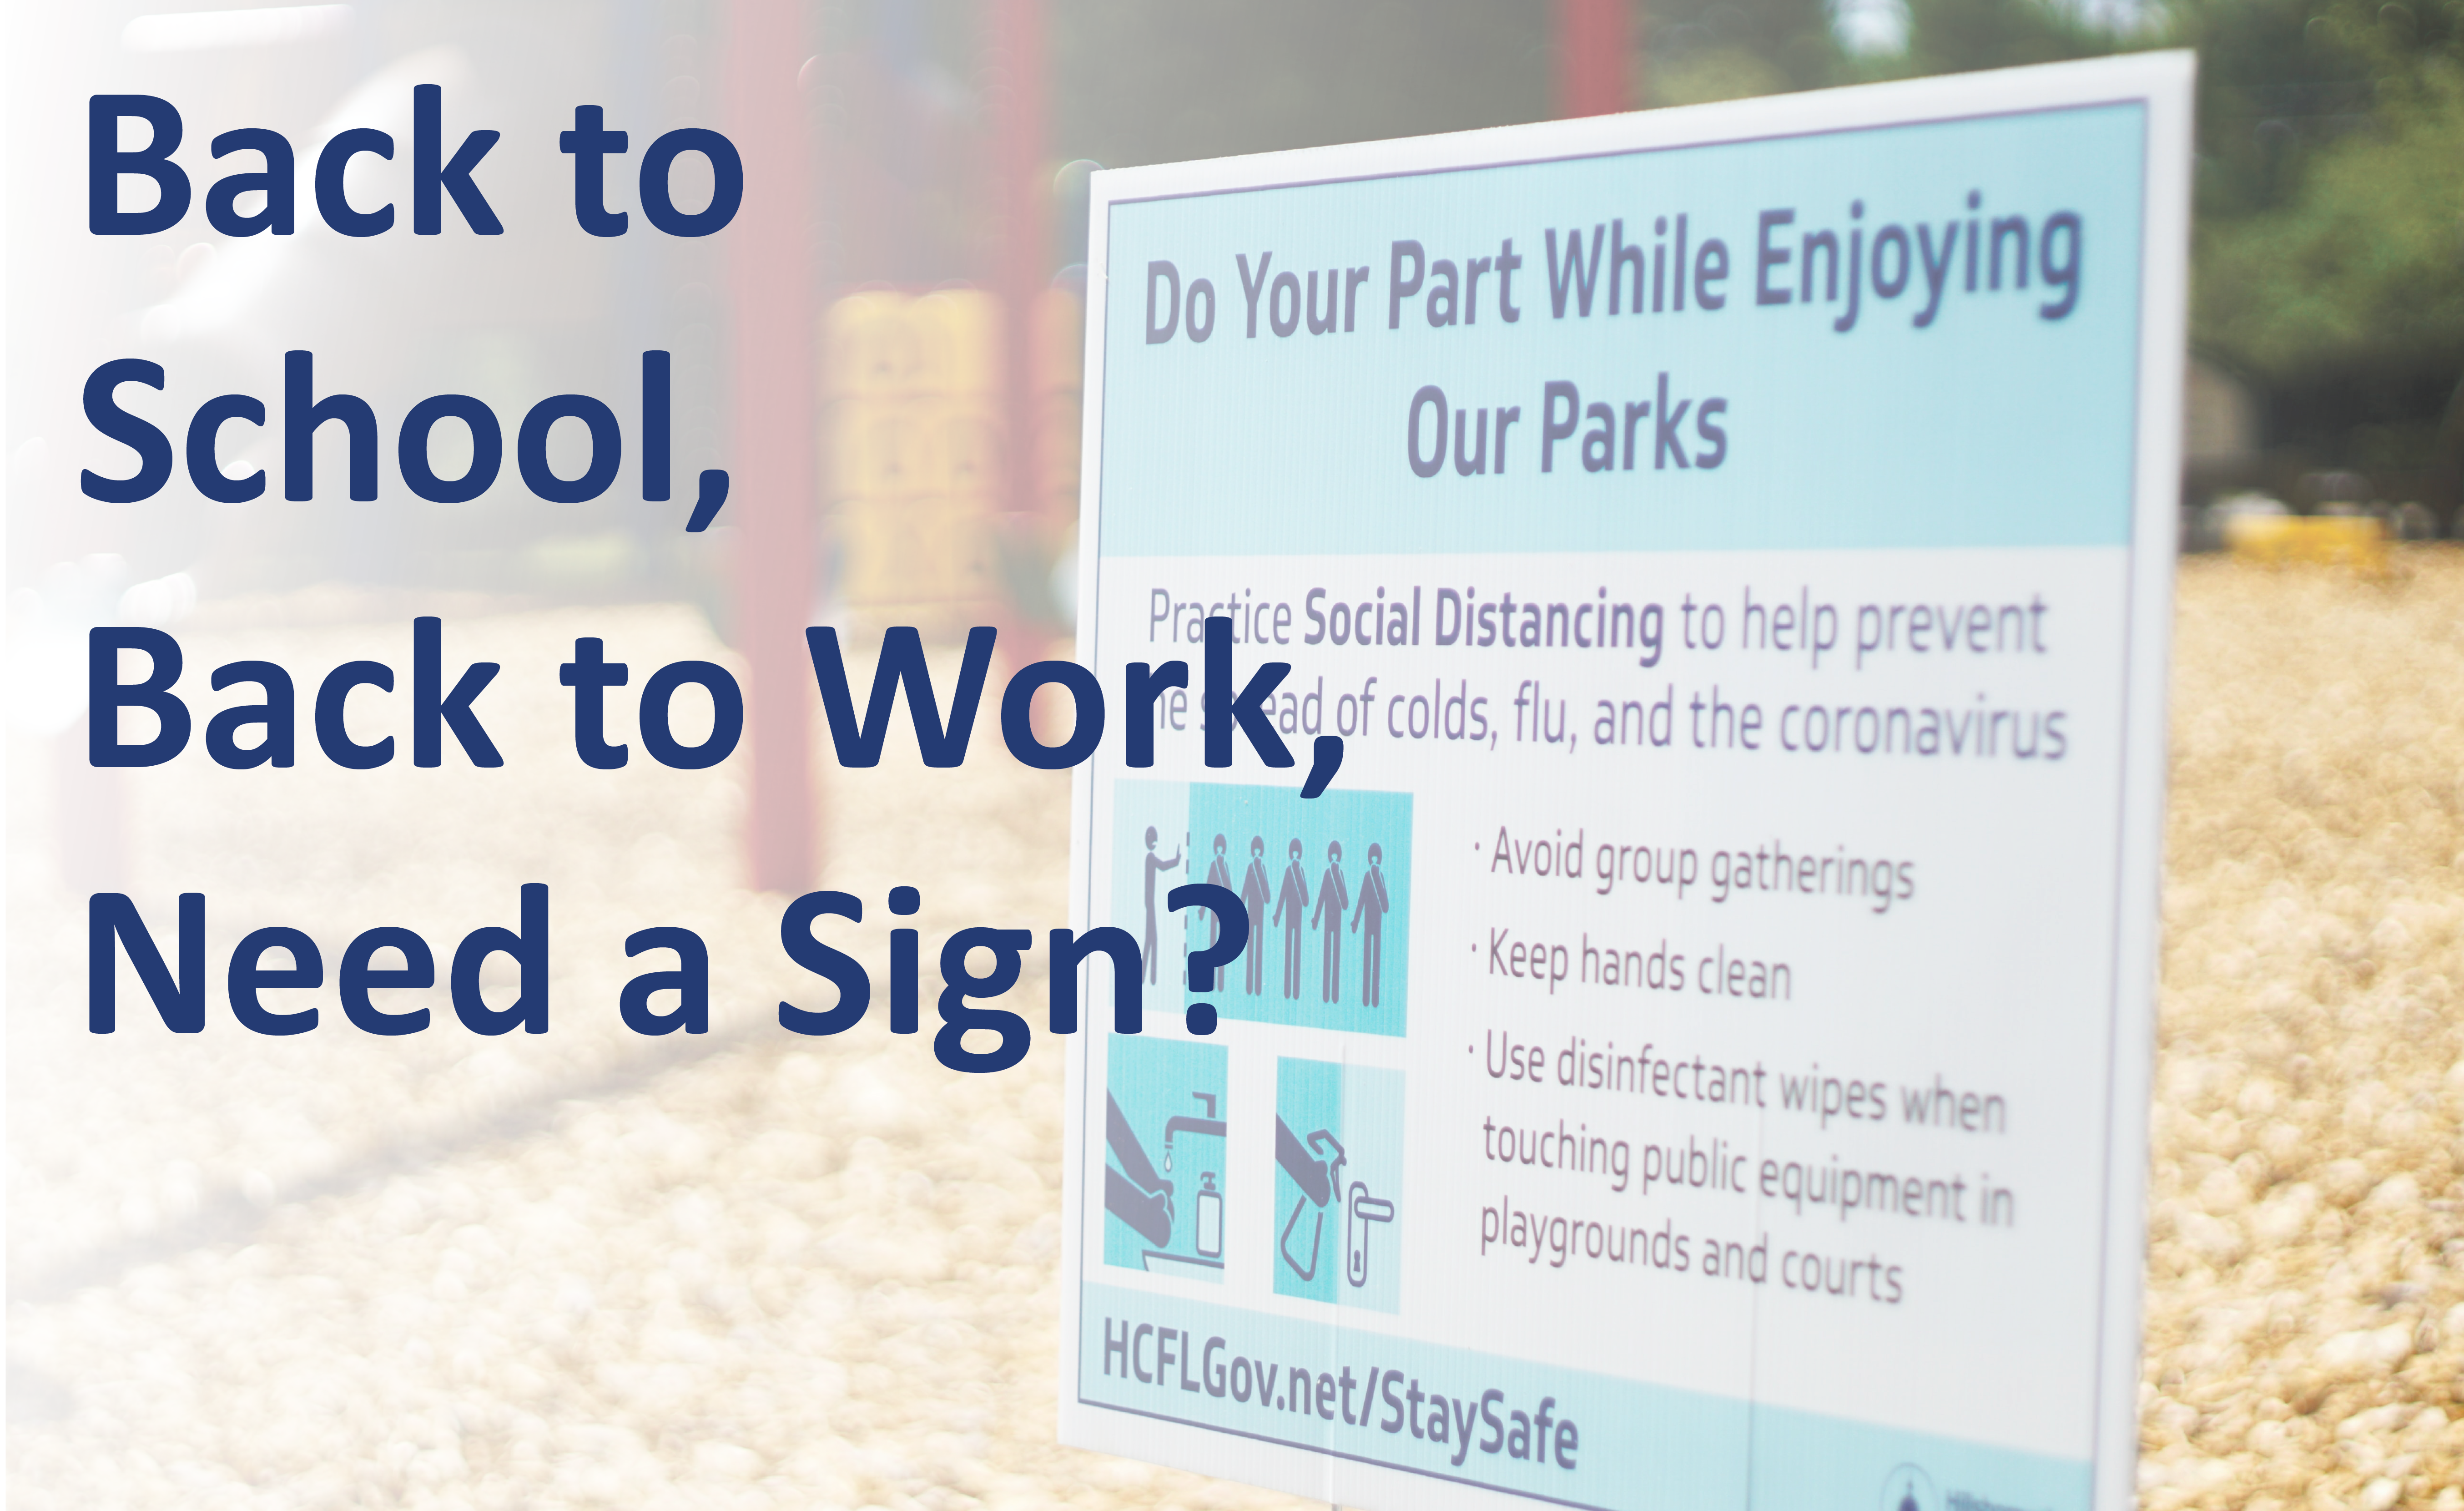 Featured image for “Back to School, Back to Work, Need a Sign?”